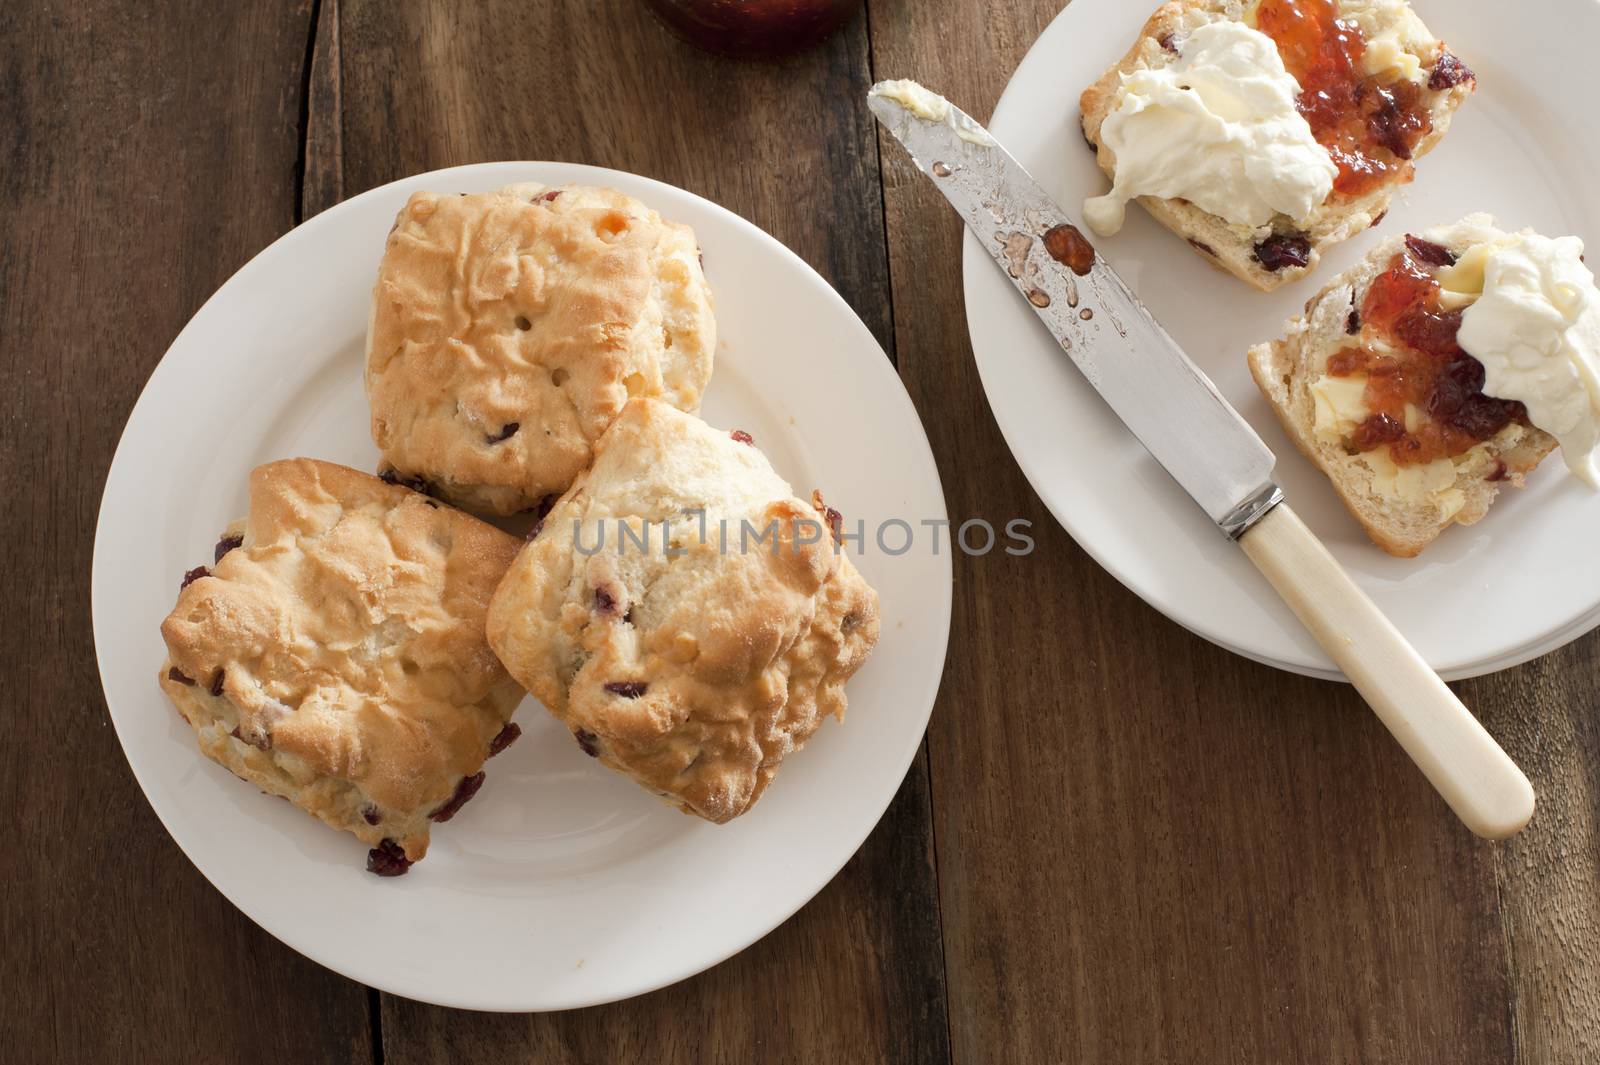 Freshly baked rock cakes or fruit scones by stockarch